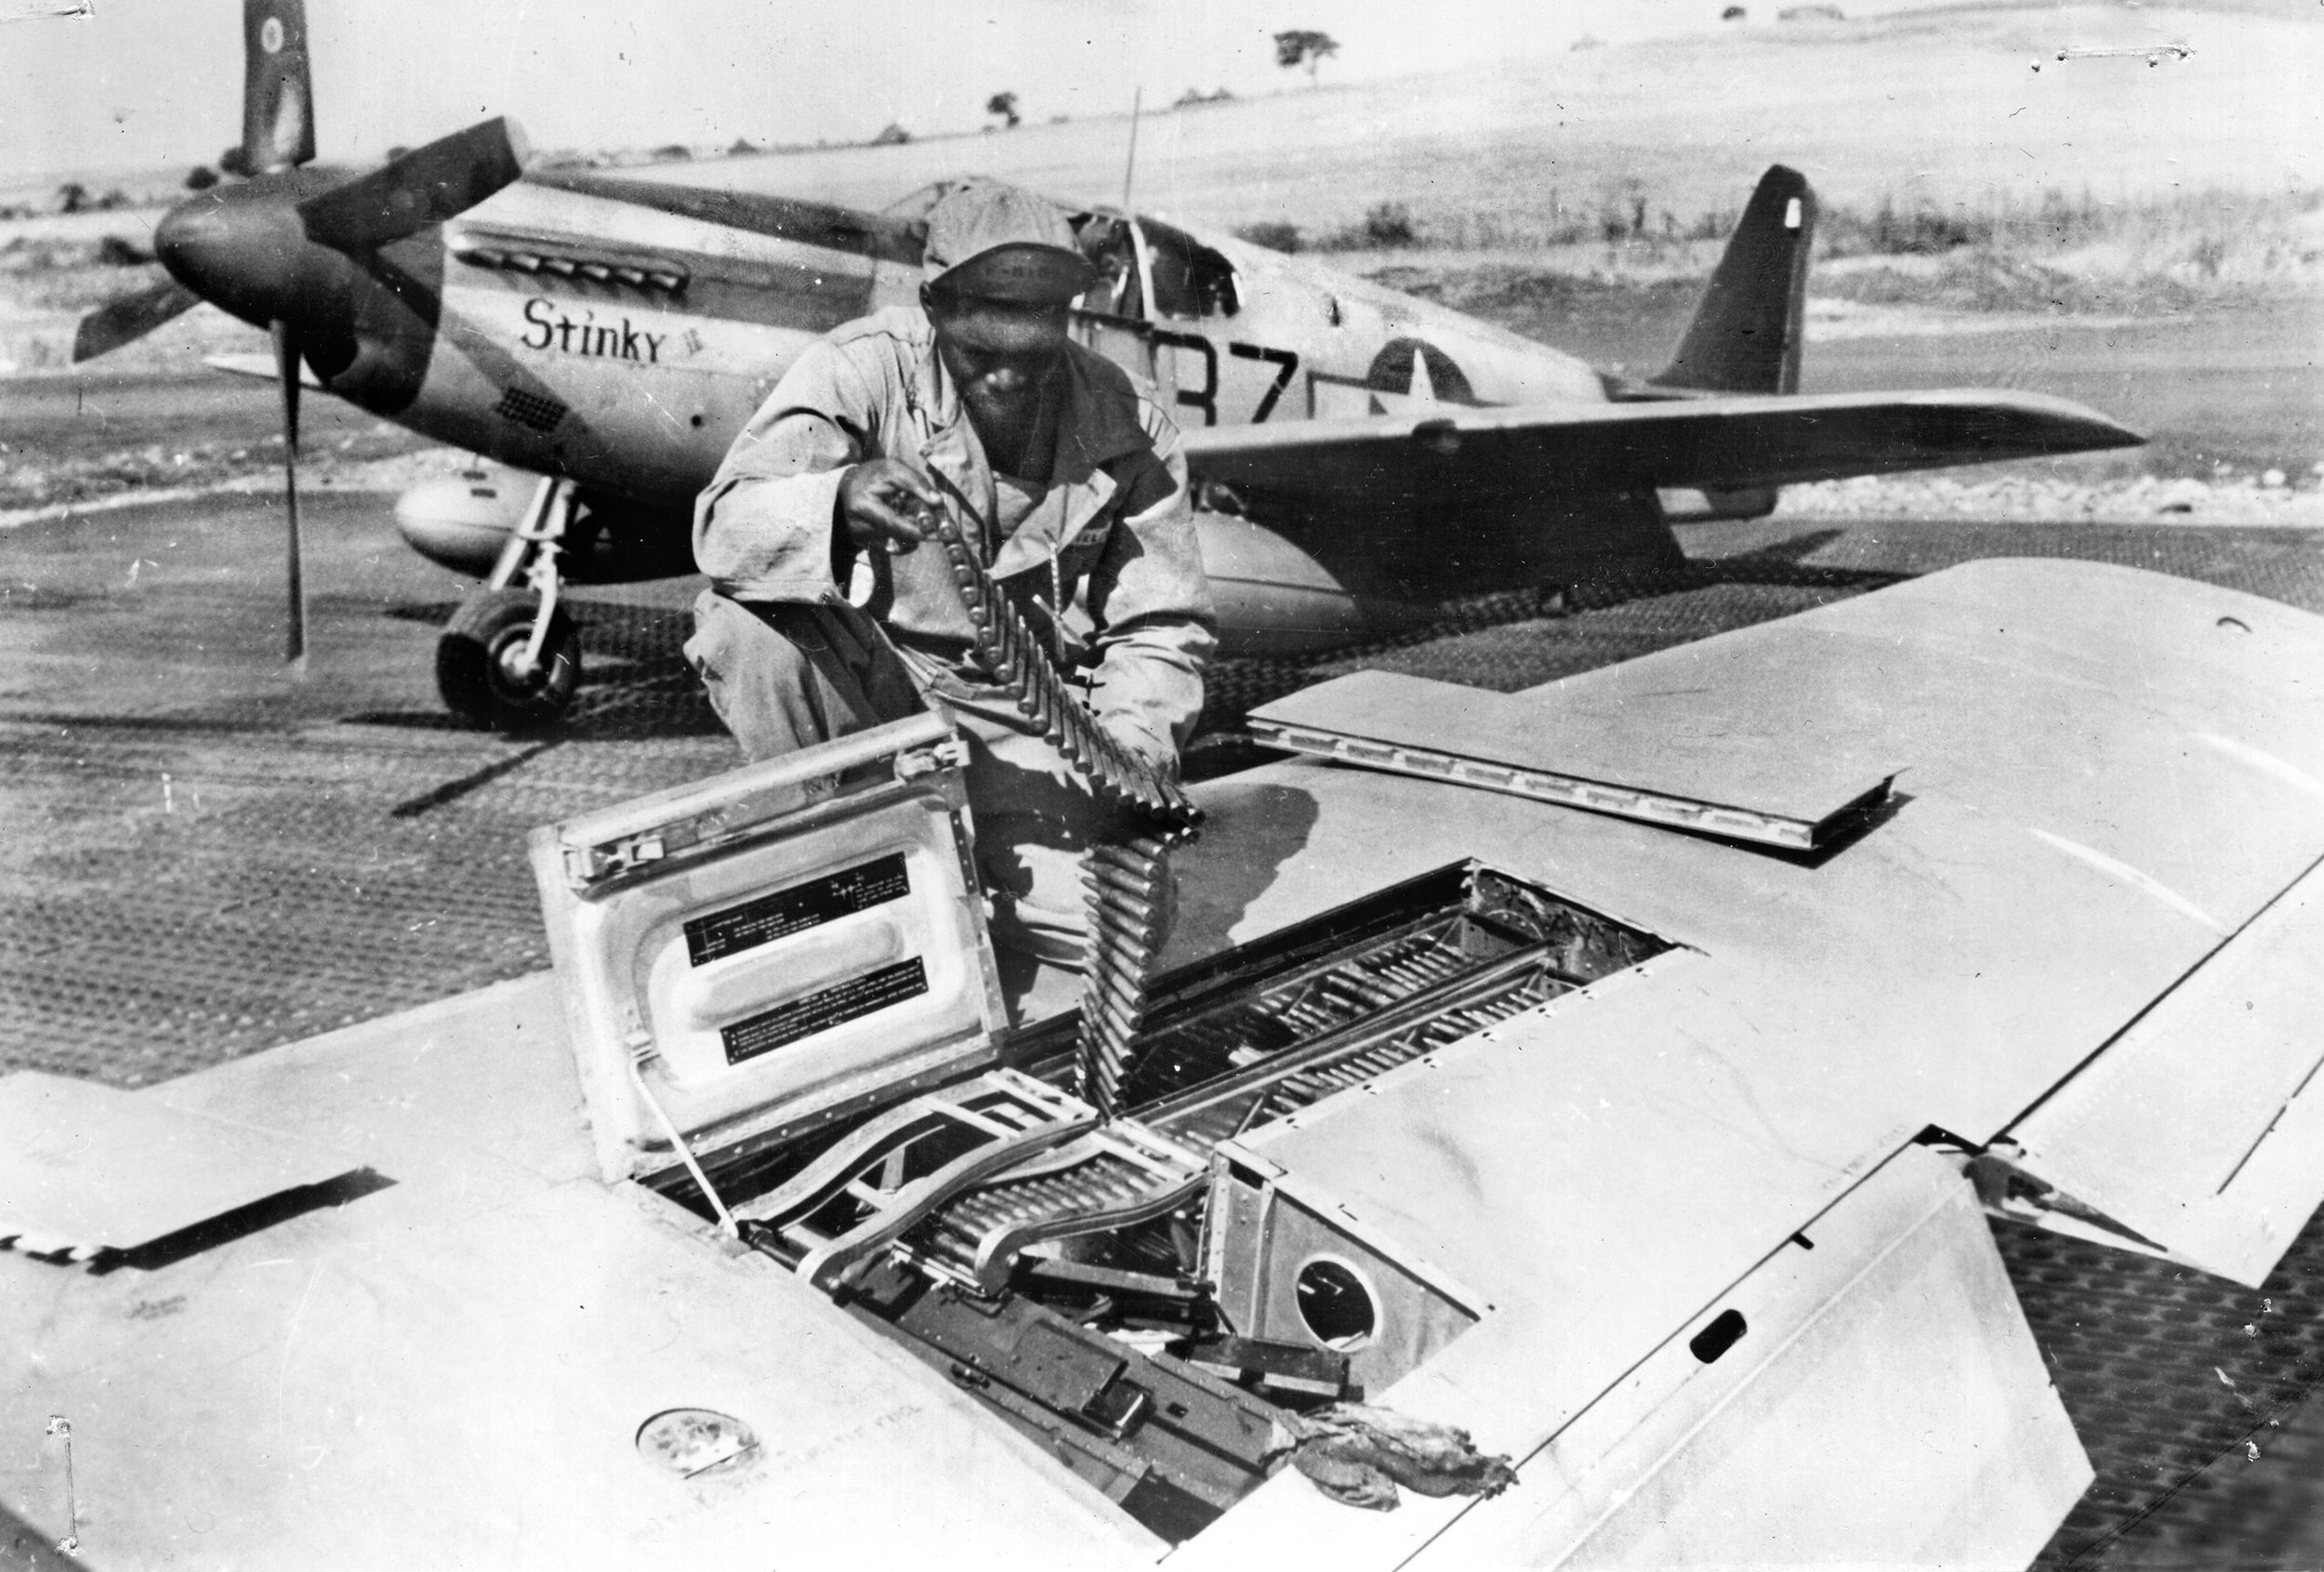 Private John Fields, an armorer with the 332nd Fighter Group, loads .50-caliber ammunition belts into the wings of a P-51 Mustang before a mission escorting 15th Air Force bombers over Germany.